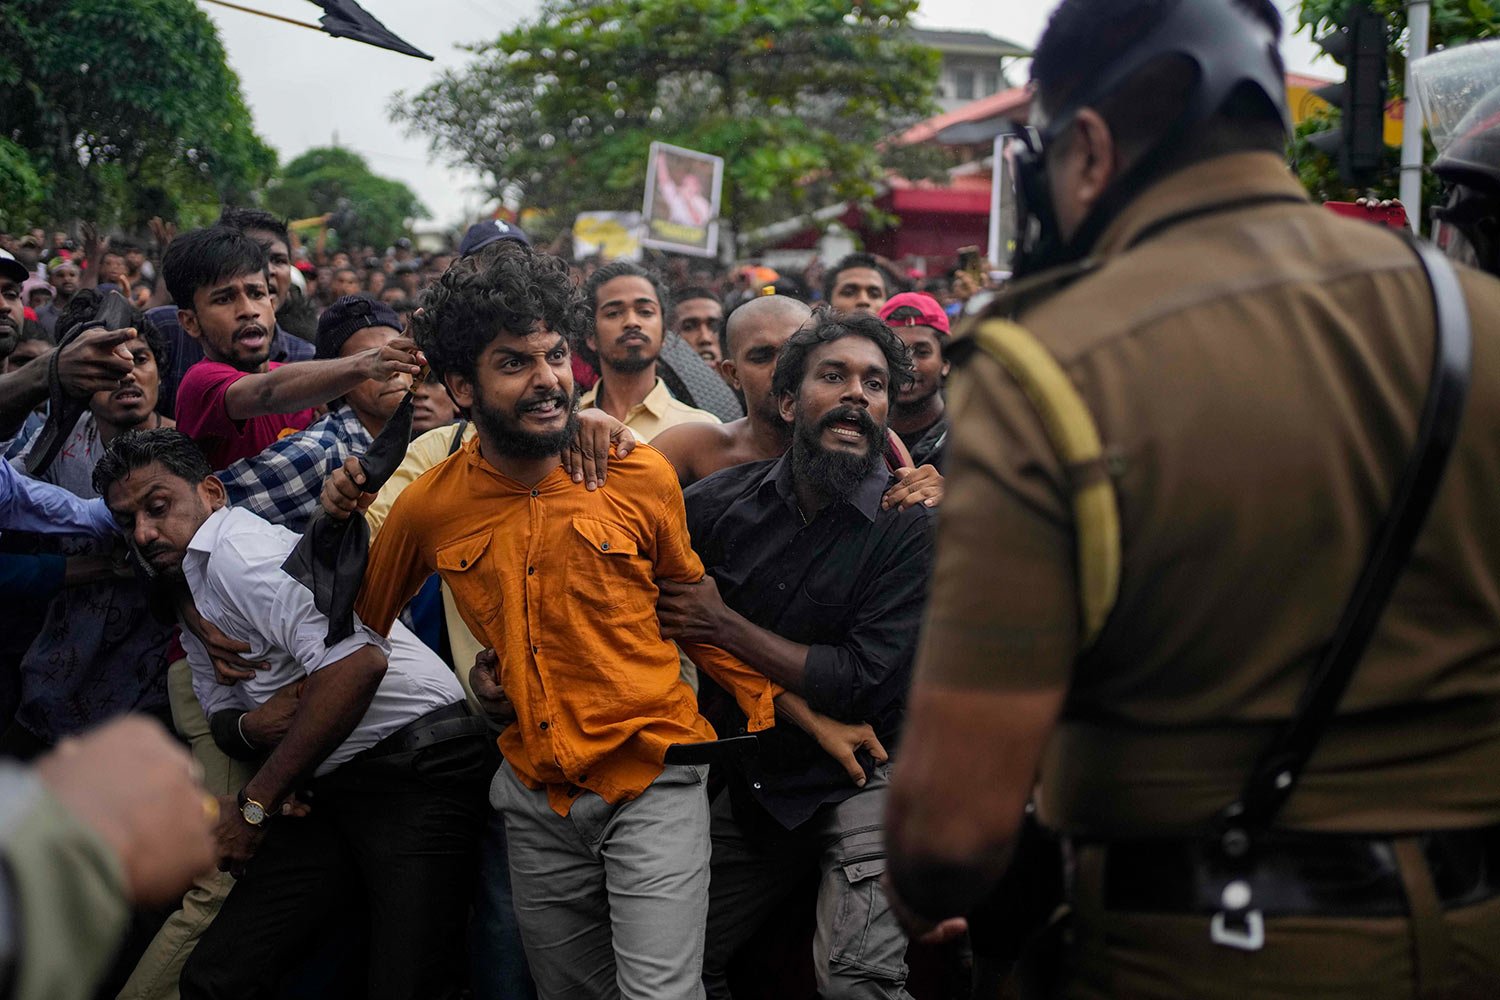  Members of Sri Lanka's Inter University Students Federation heckle a police officer during a protest held outside a state run university demanding the release of student union leaders who are in custody in Kelaniya, outskirts of Colombo, Sri Lanka, 